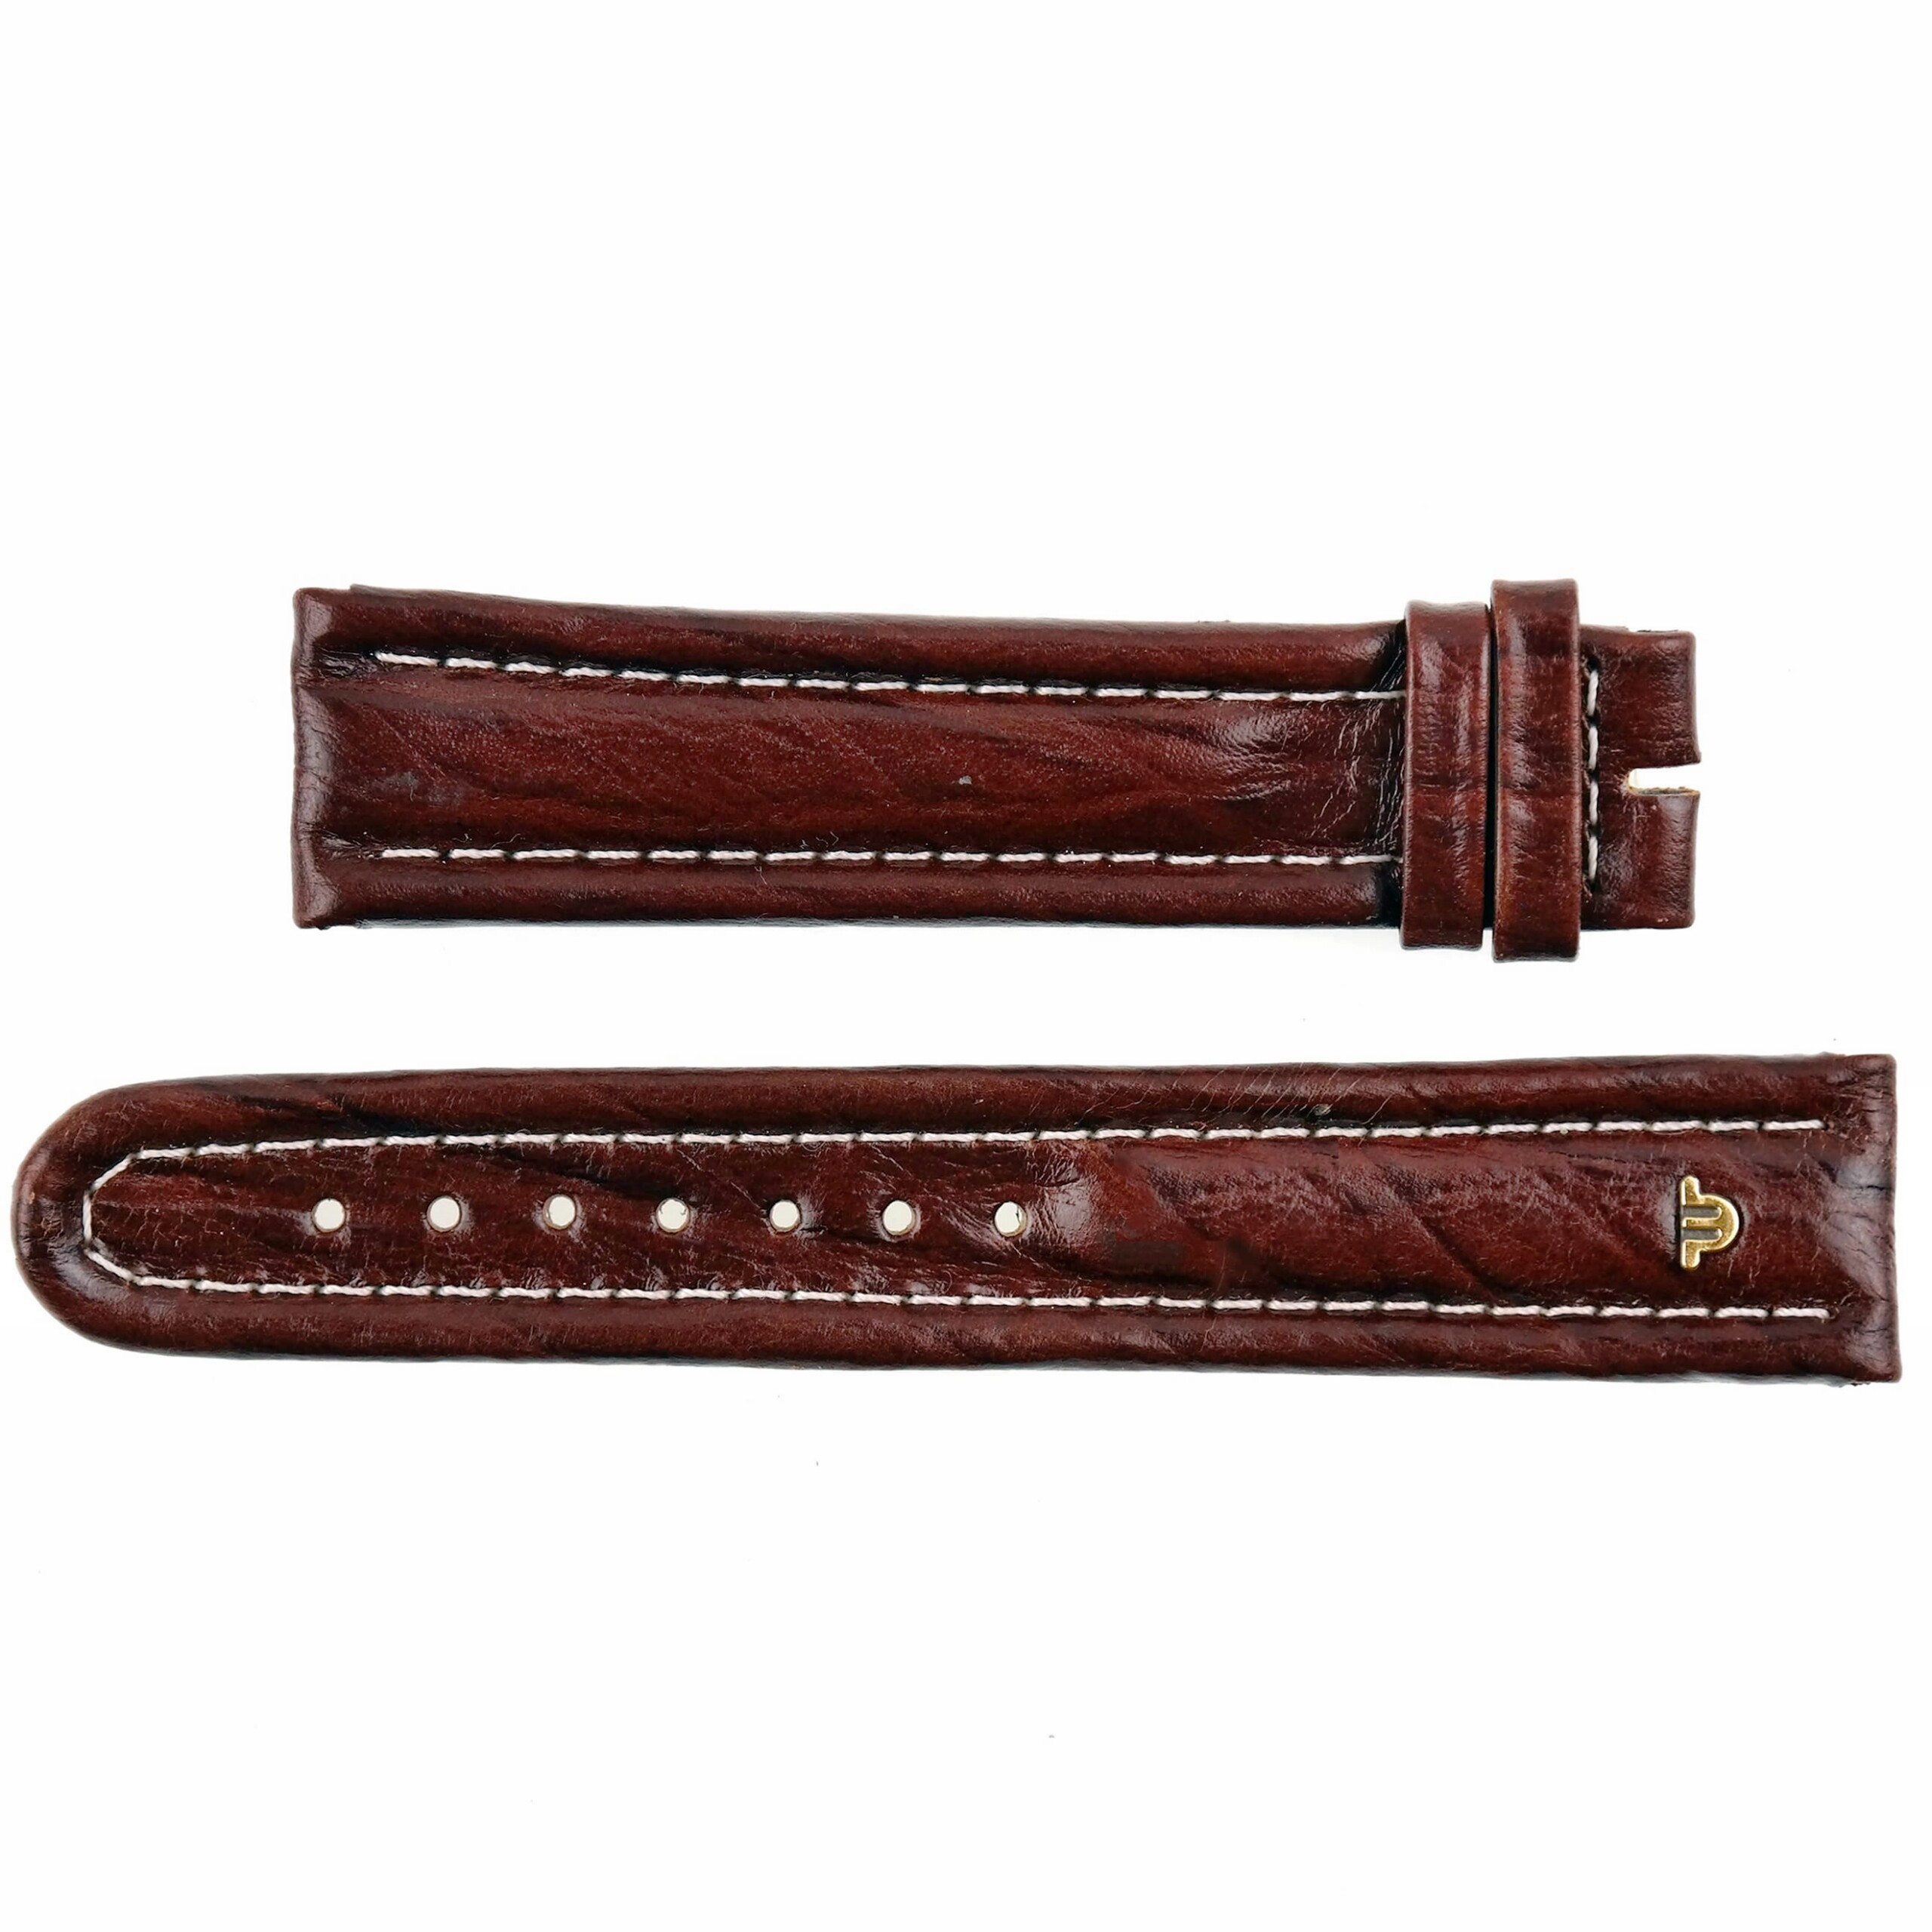 MAURICE LACROIX - Leather Watch Strap - 20 mm - Swiss Made - Brown